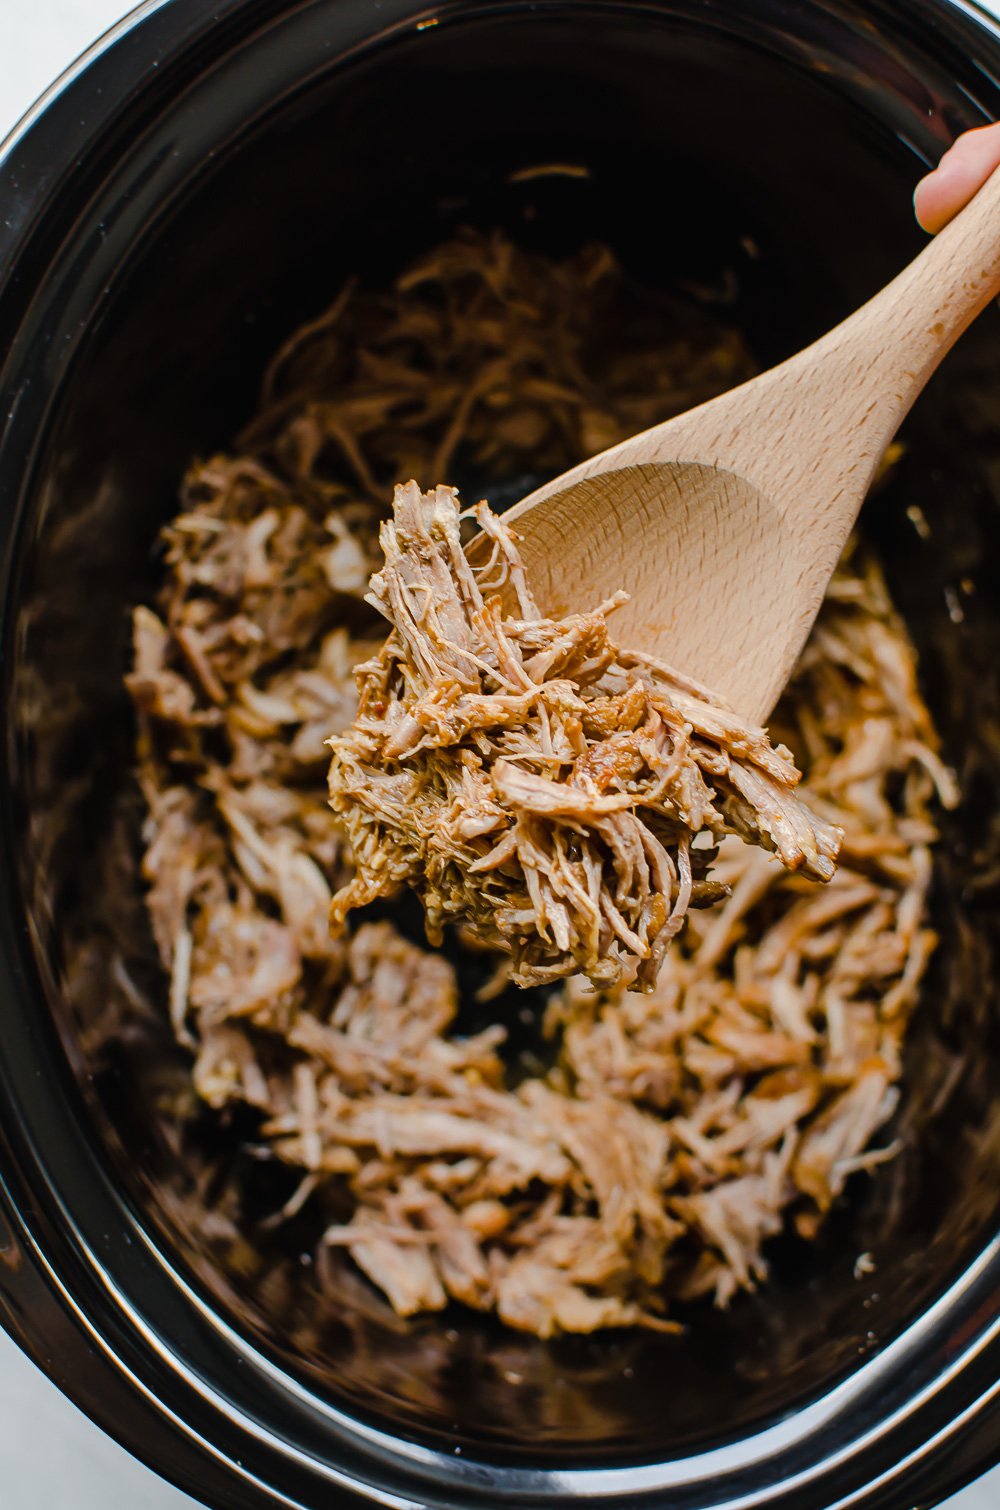 Cooked pulled pork on a wooden spoon coming out of the slow cooker.